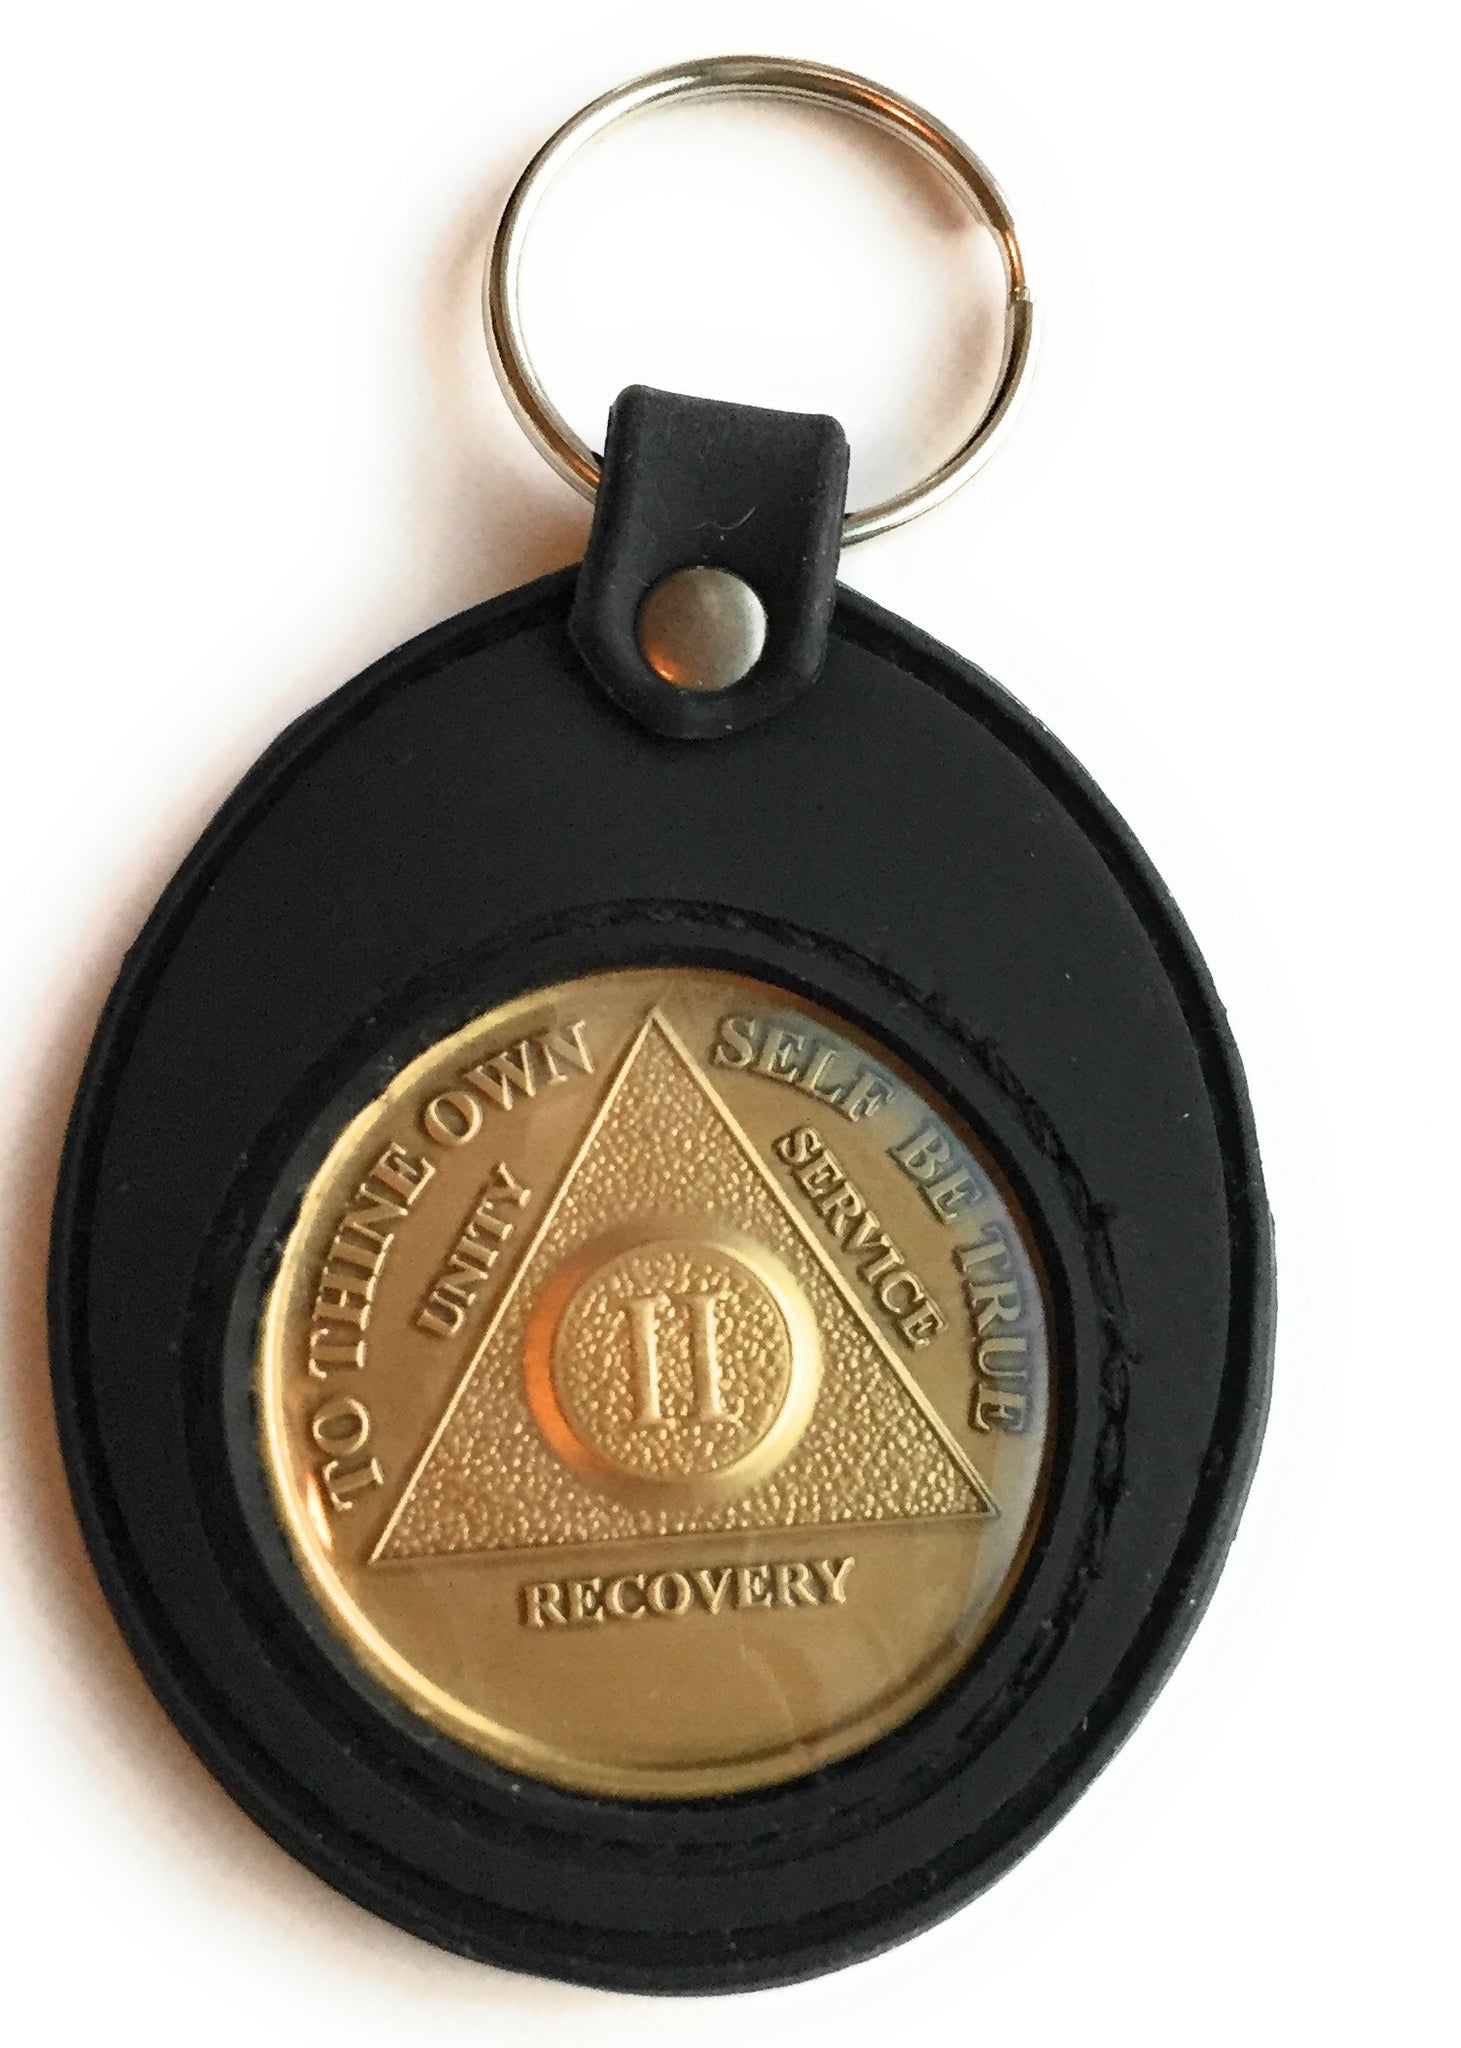 Leather Keychain Holder for Any My Recovery Store 40mm Medallions. Available in Black and Brown Brown